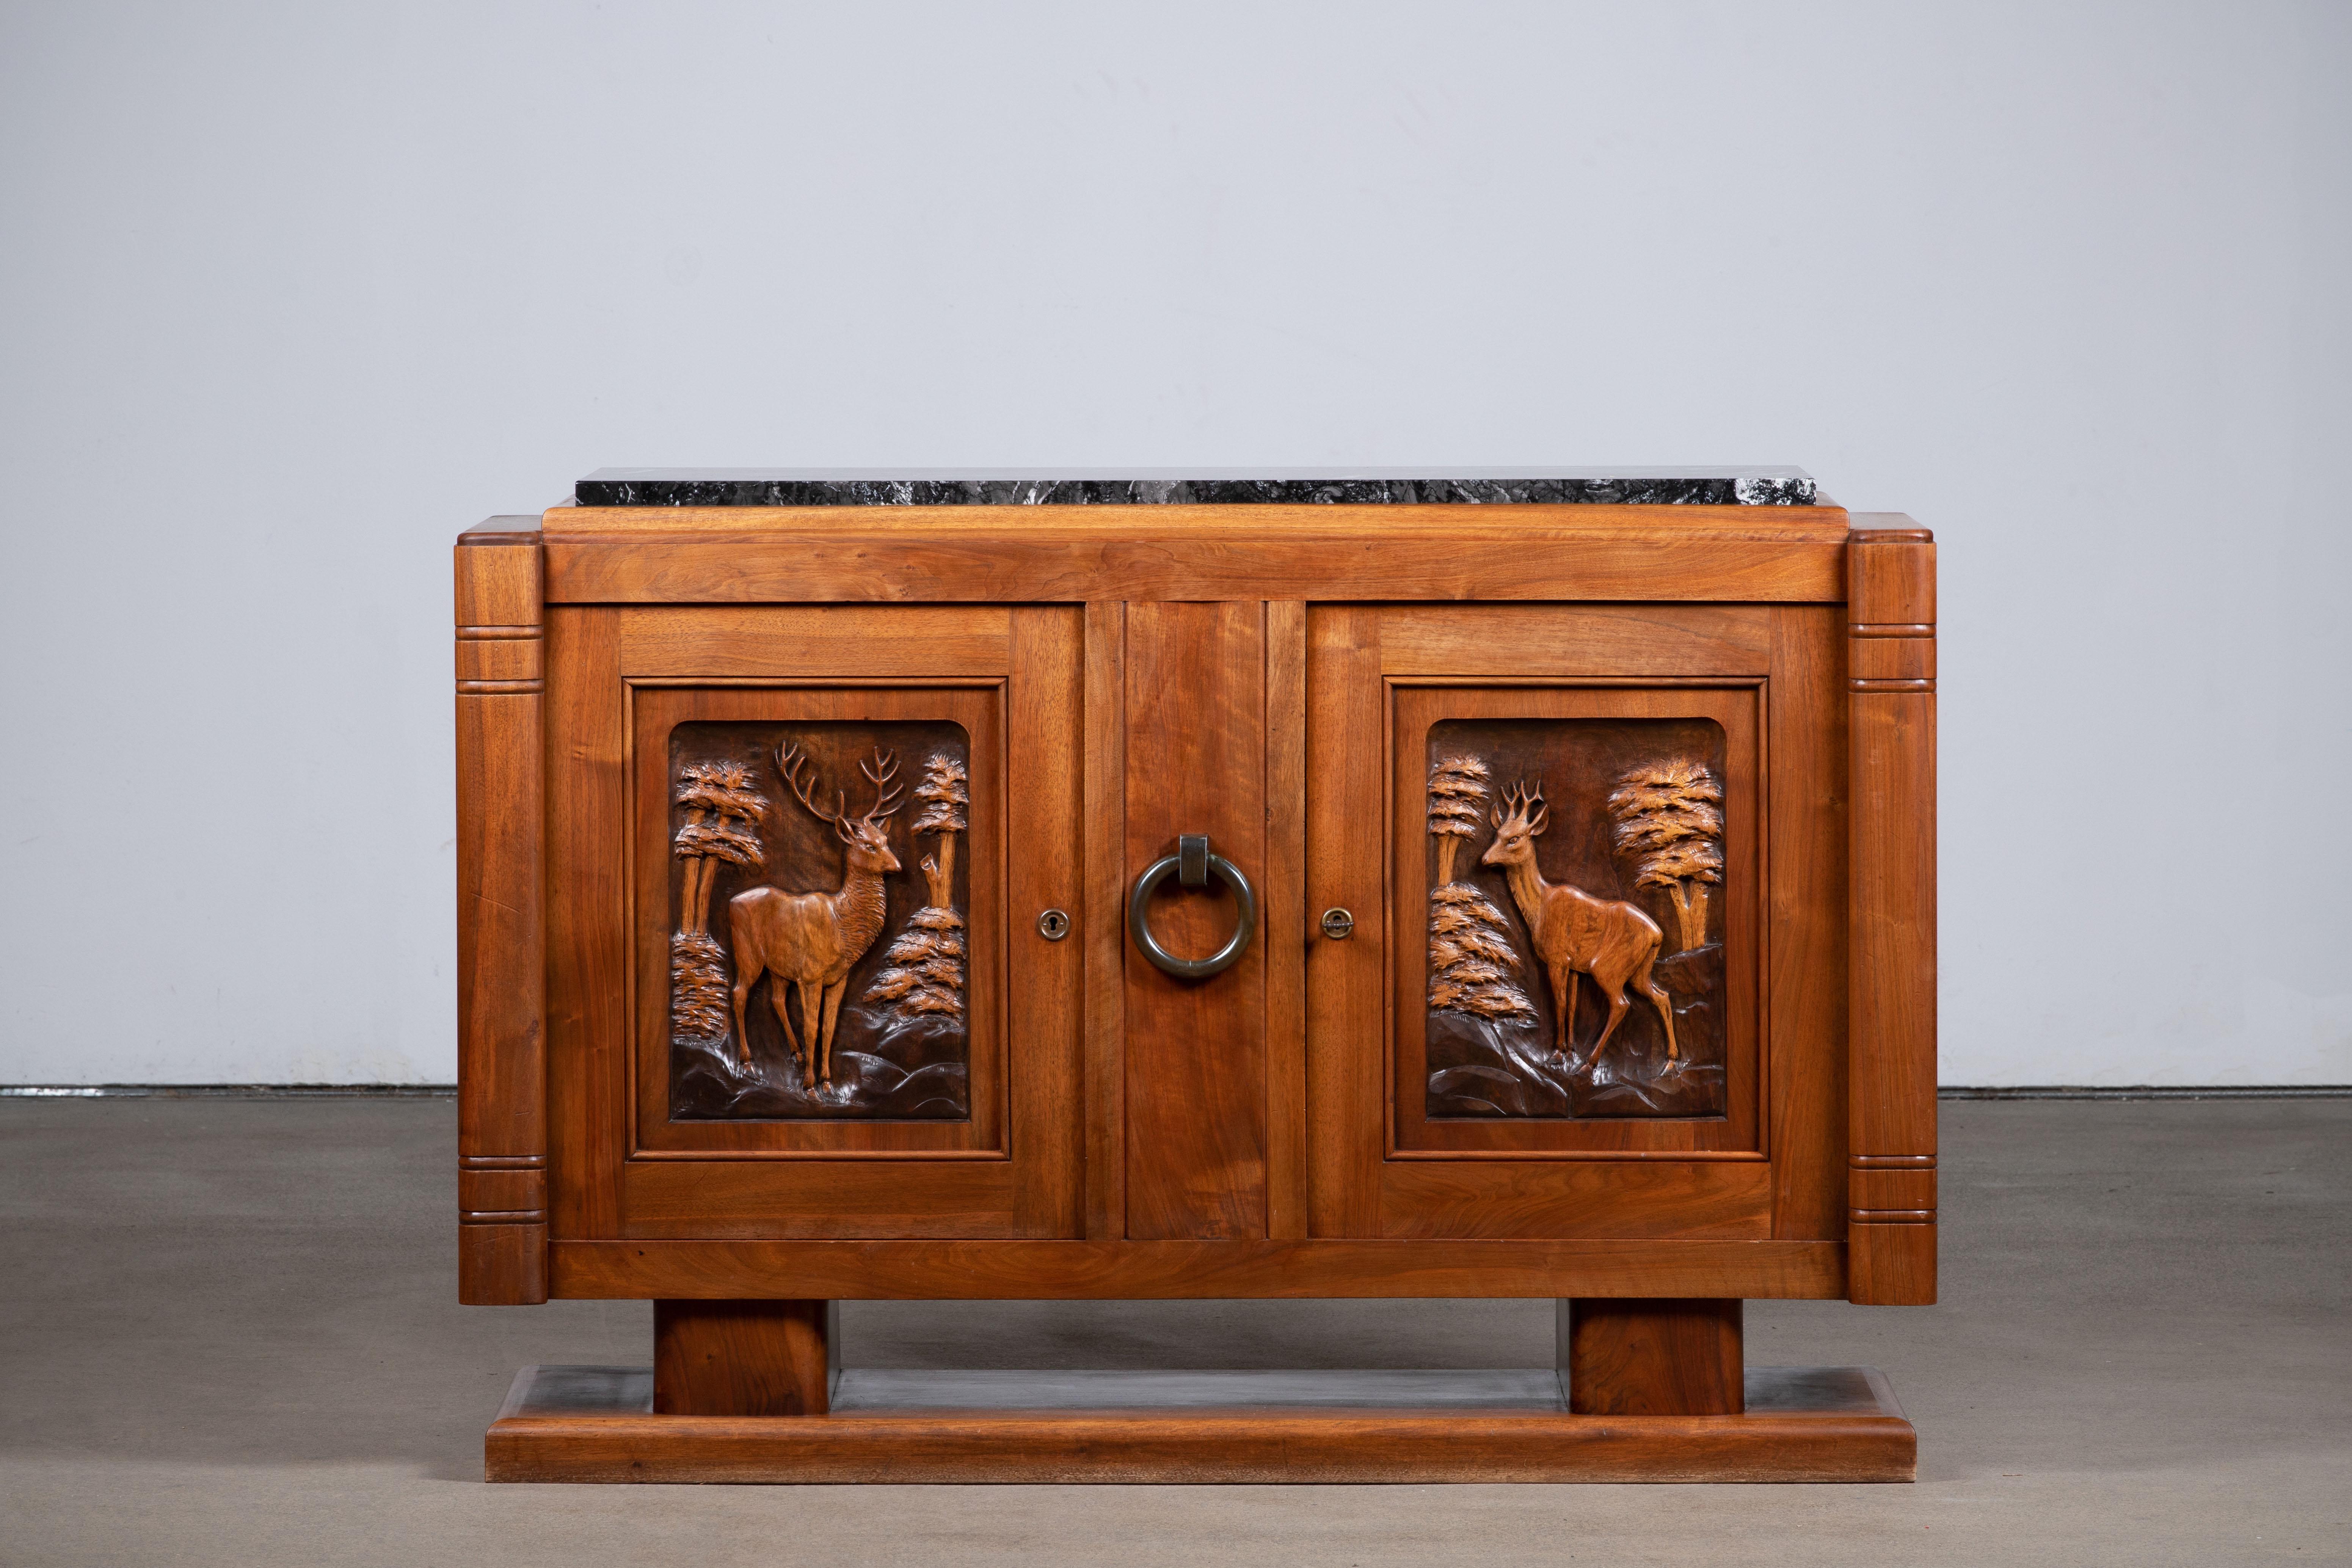 A large handcarved sideboard / credenza, France, c1940s.
Consists of 4 central drawer and two storage compartments. 
Inlaid wood center shelves, brass detailing and handcarved design doors make this piece really stand out.
The sideboard is in